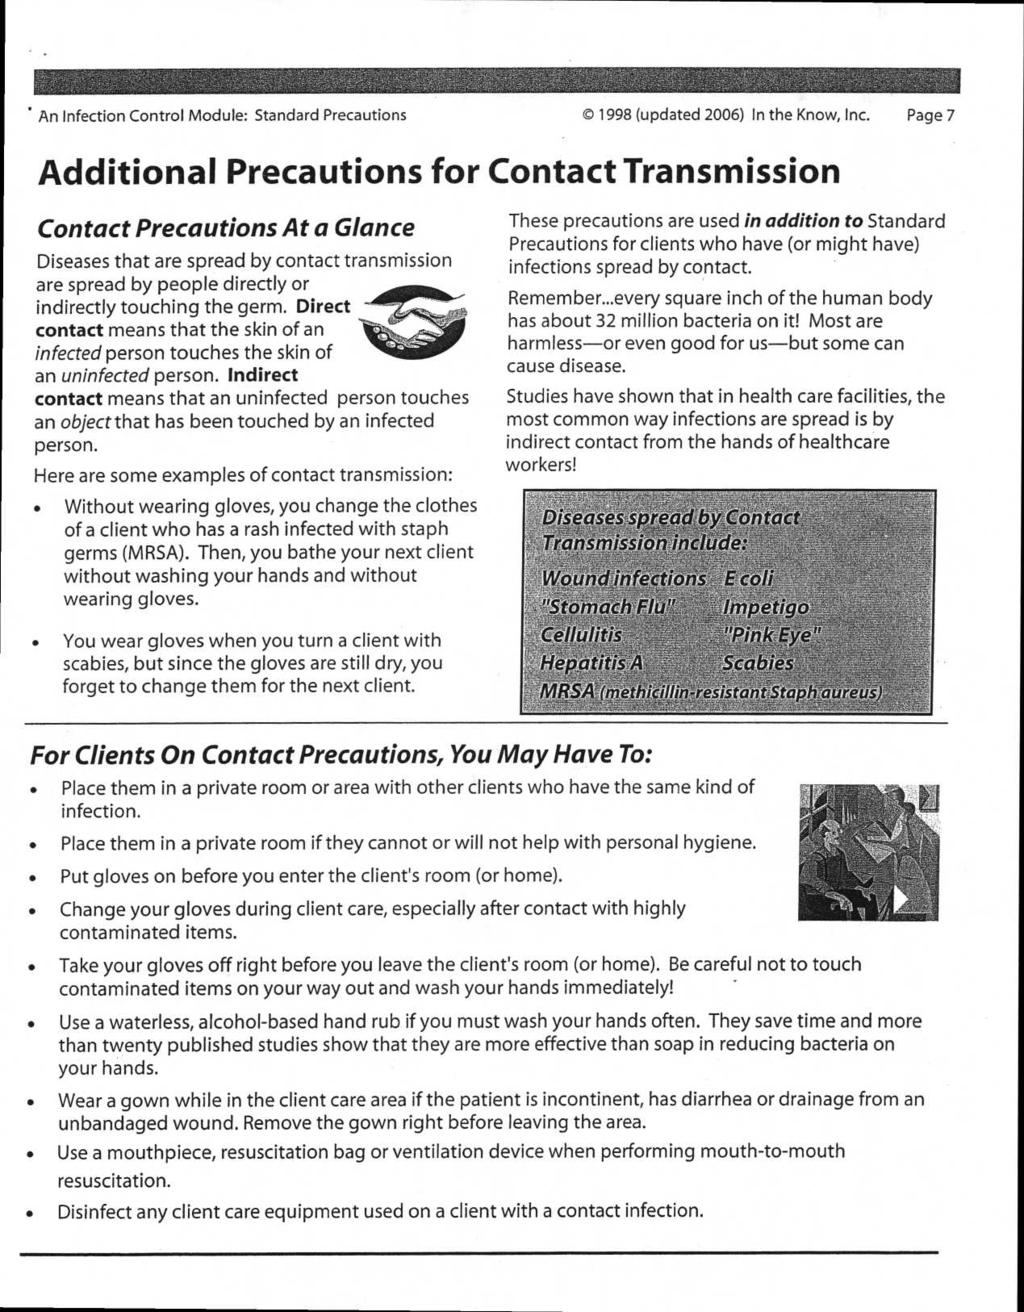 An Infection Control Module: Standard Precautions 1998 (updated 2006) In the Know, Inc.